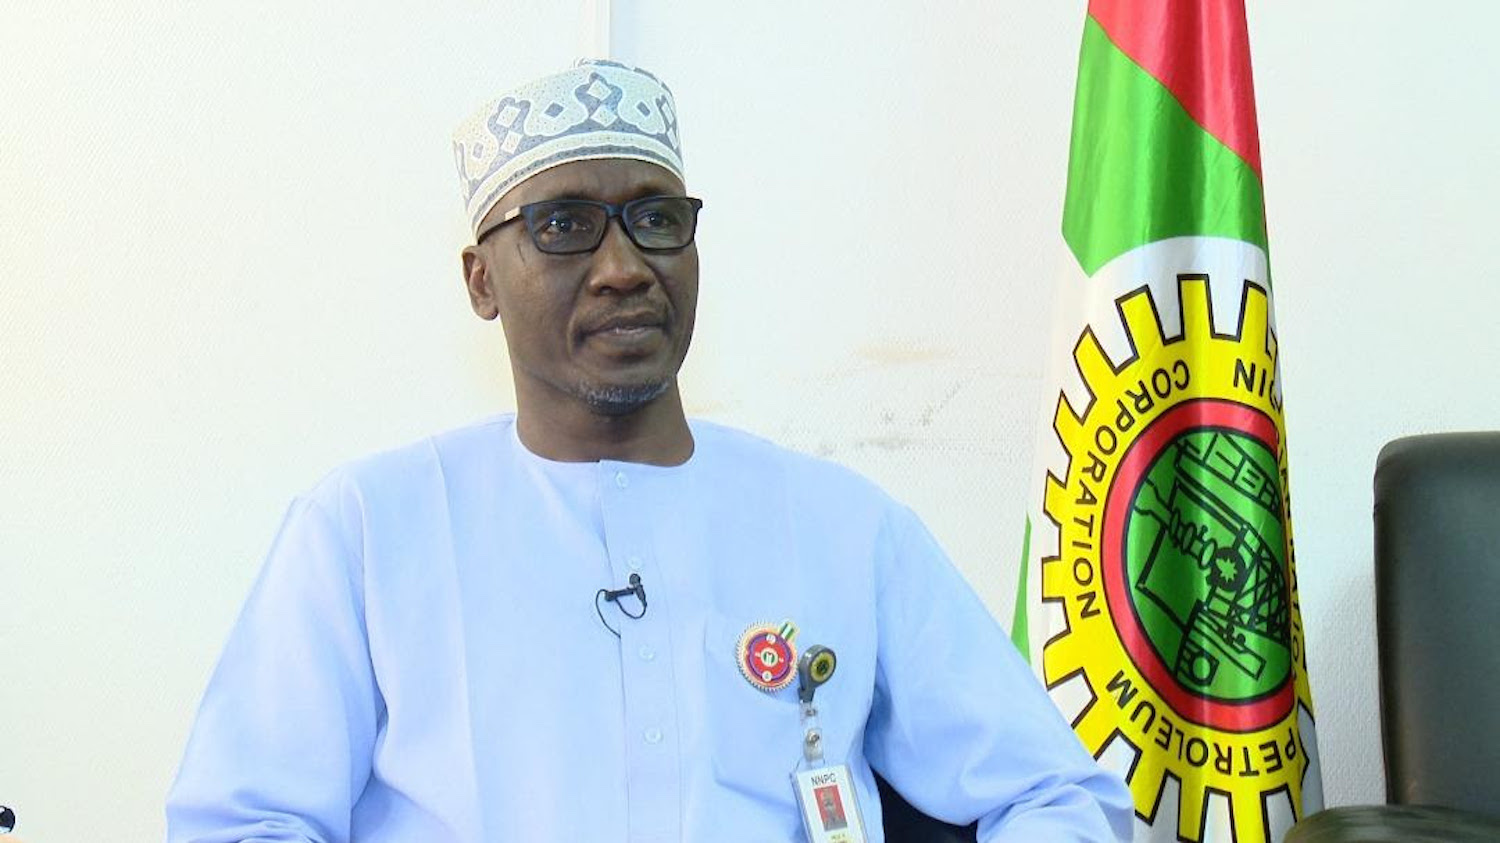 NNPC, subsidiaries have 6,621 staff nationwide - Report 